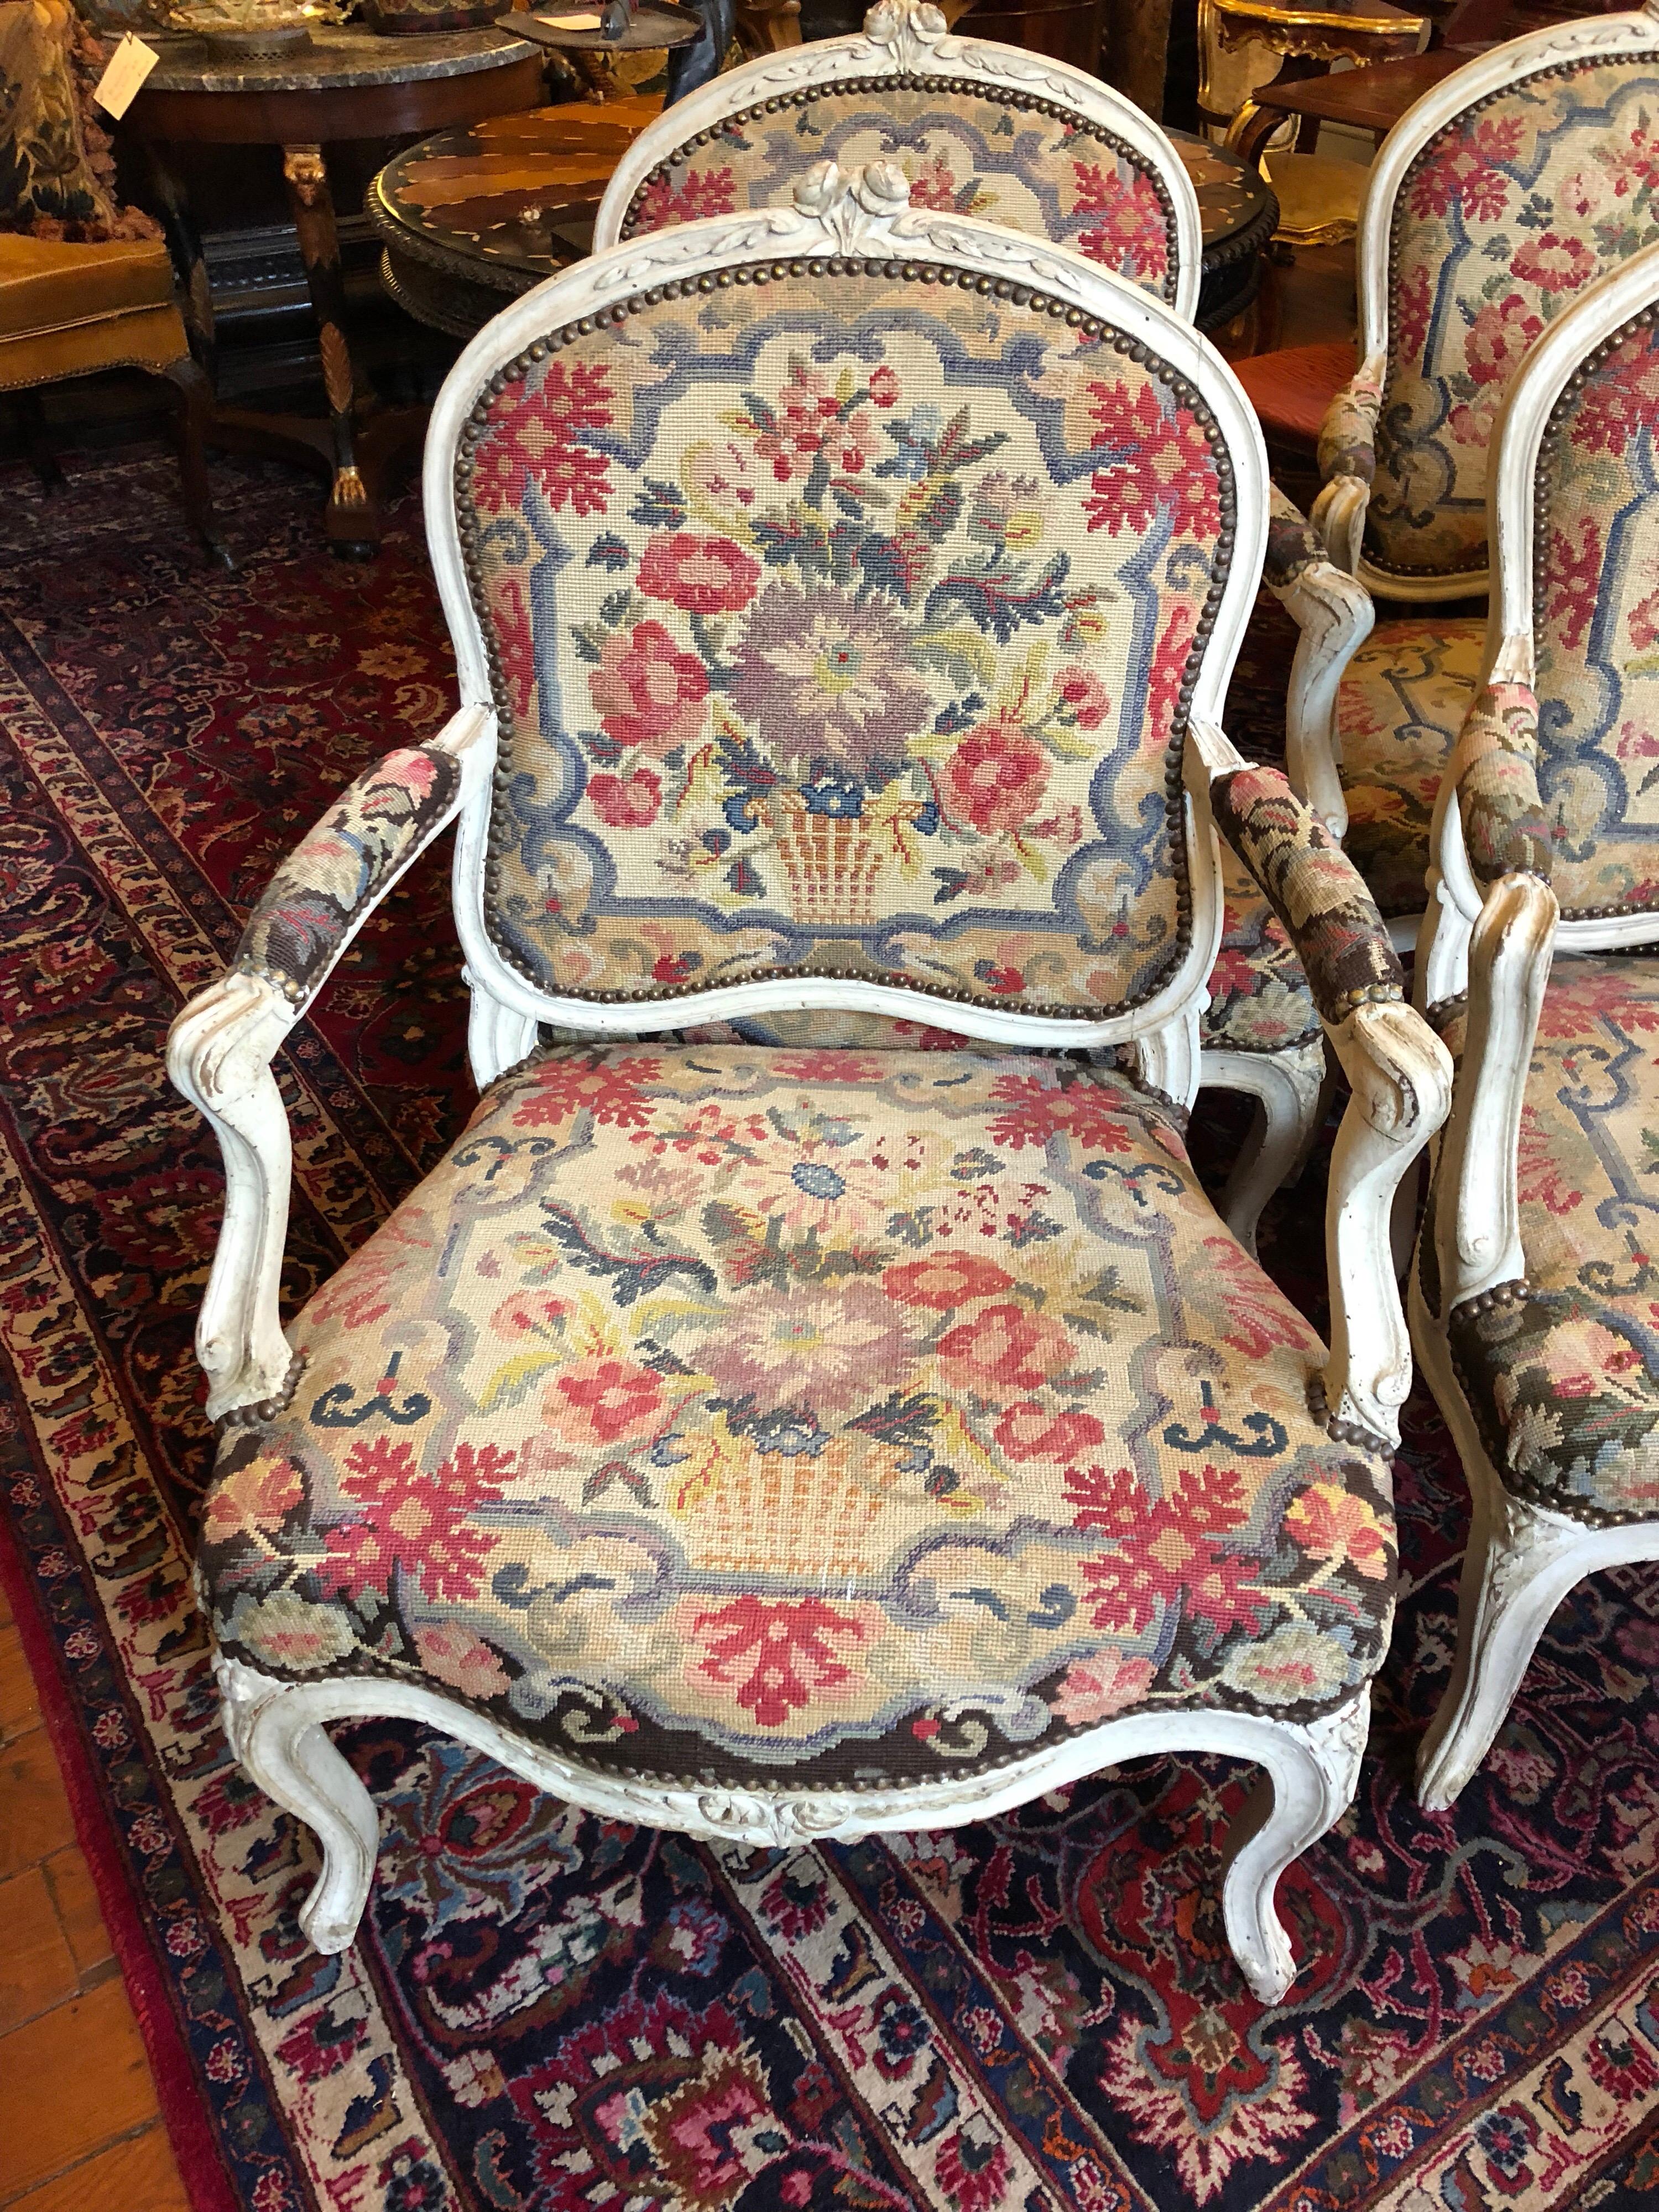 Exceptional suite of four 18th century pained Louis XV fauteuil with original needle work. The needle work has been removed, repaired and put back on. All in exceptional condition. 
each joint is pegged consistent with an 18th century